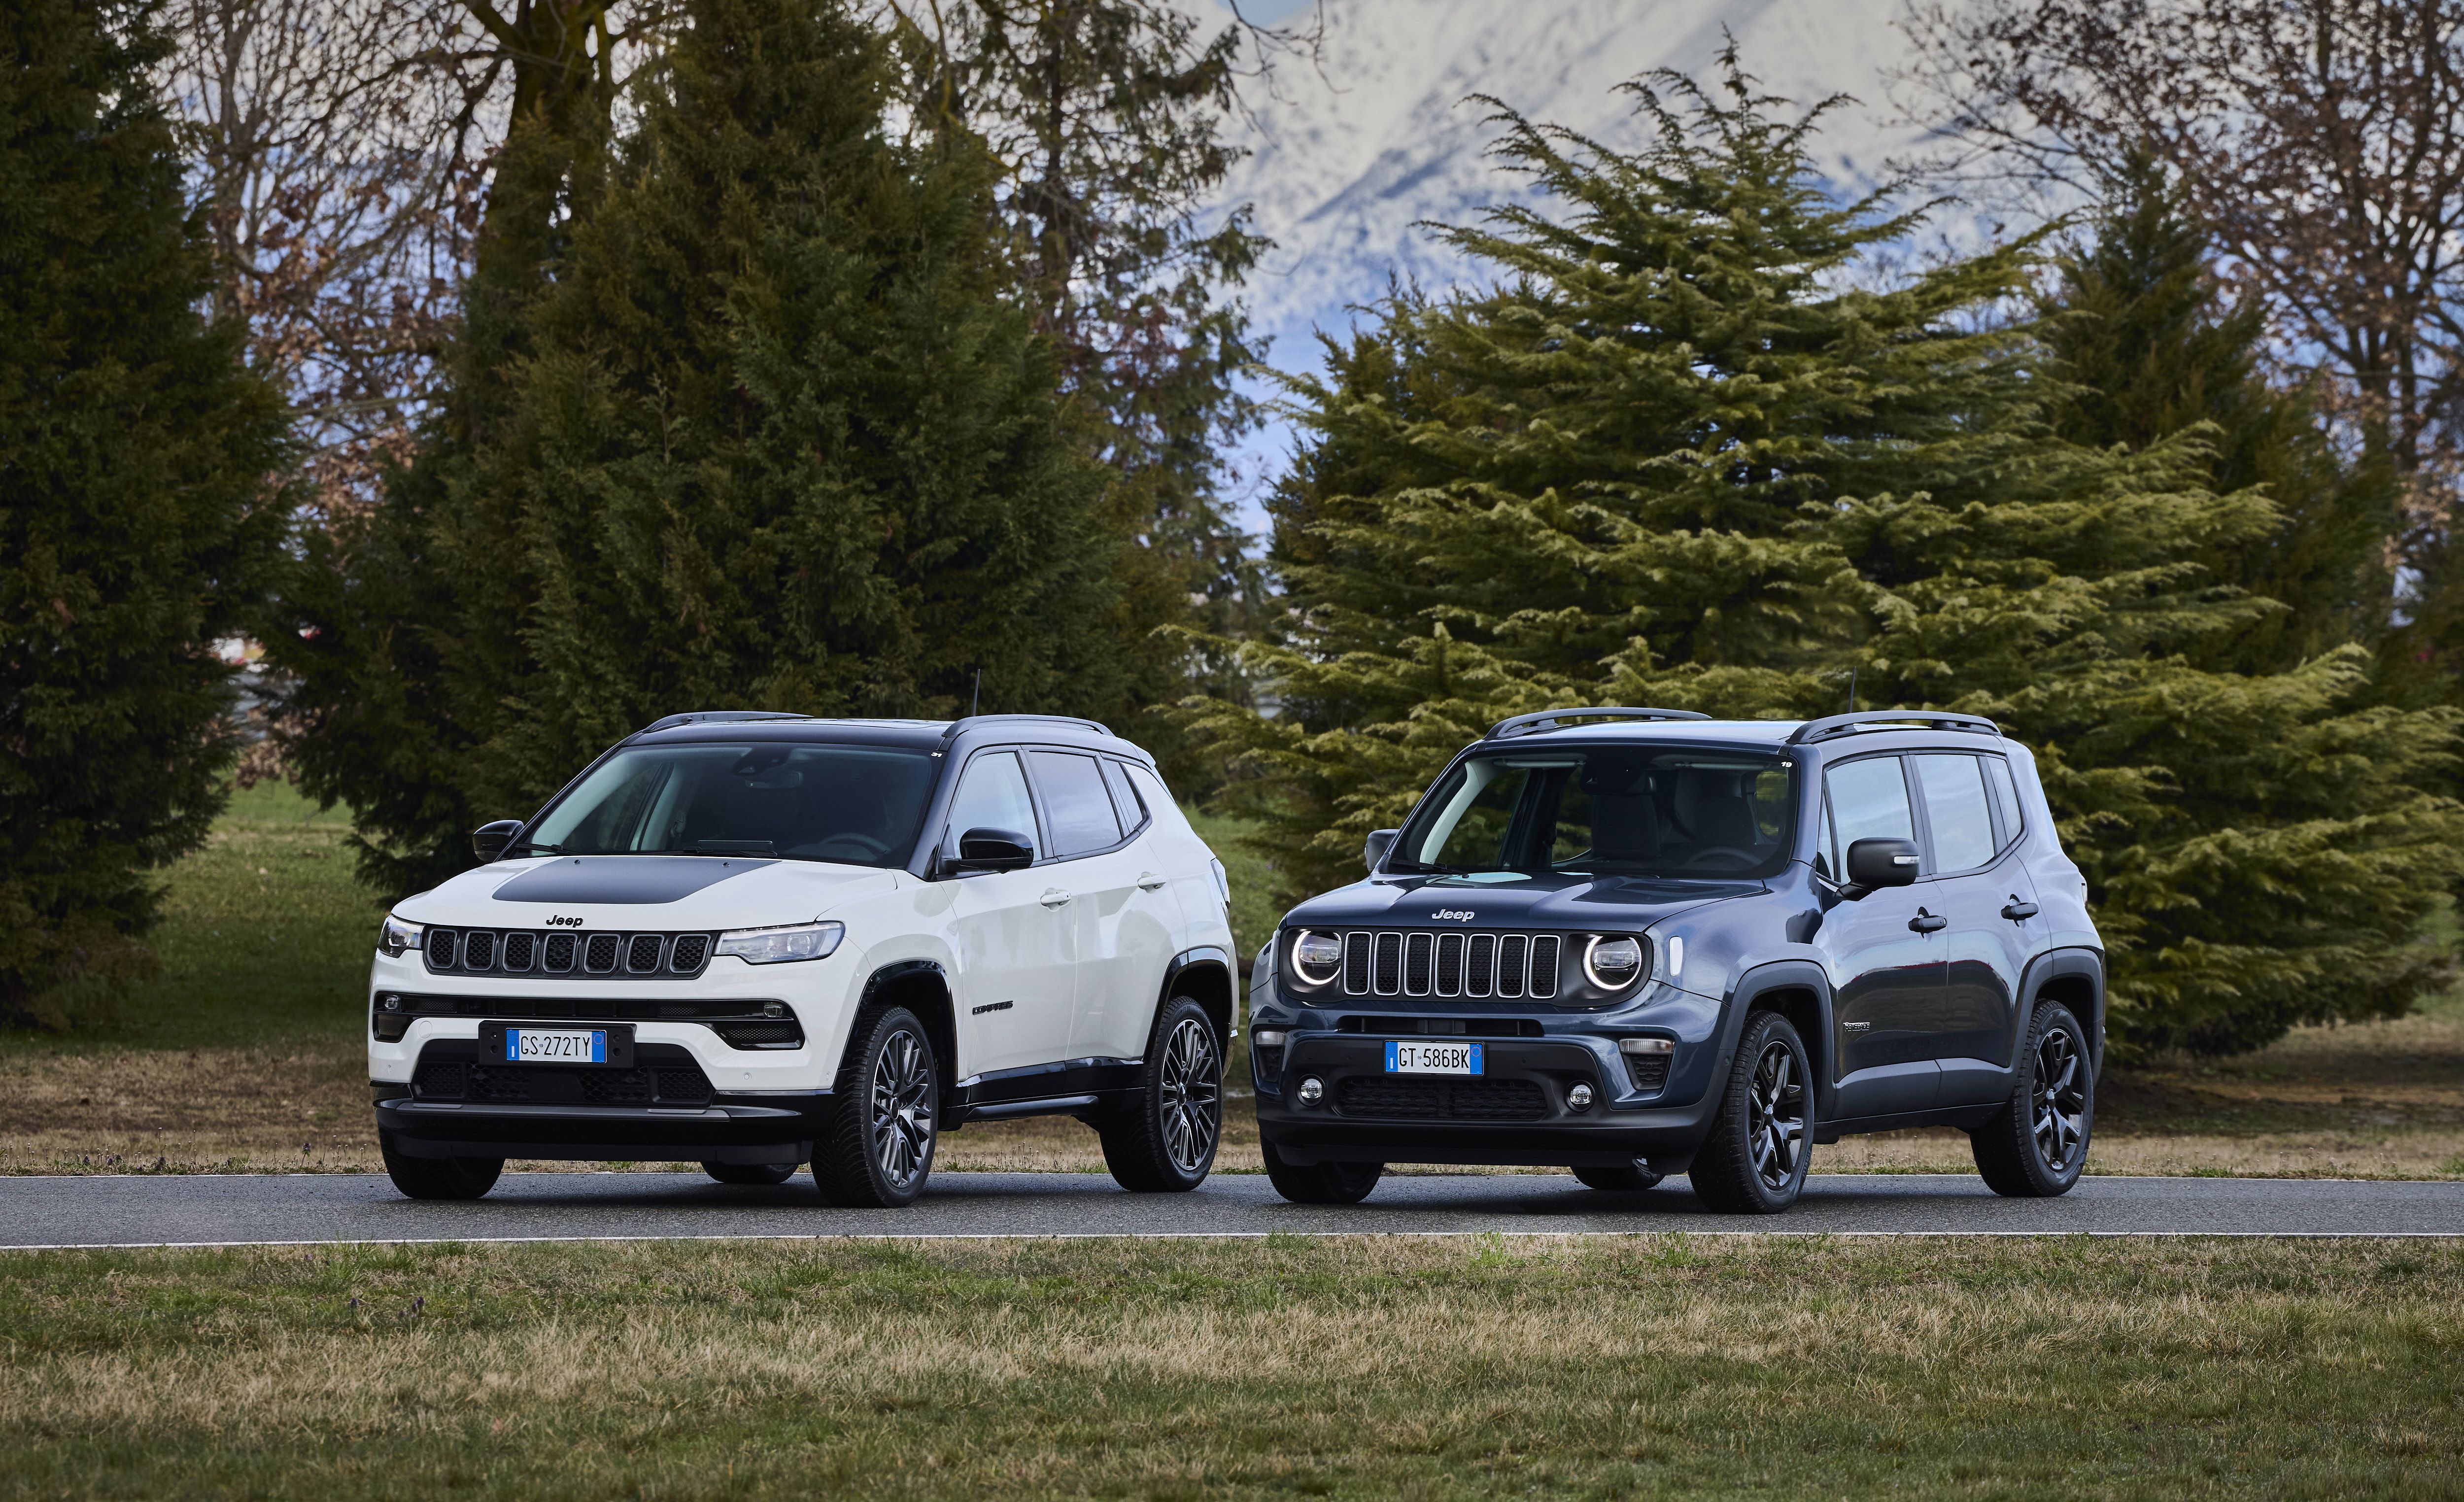 Media Drive Features New Jeep® Renegade and Compass e-Hybrid